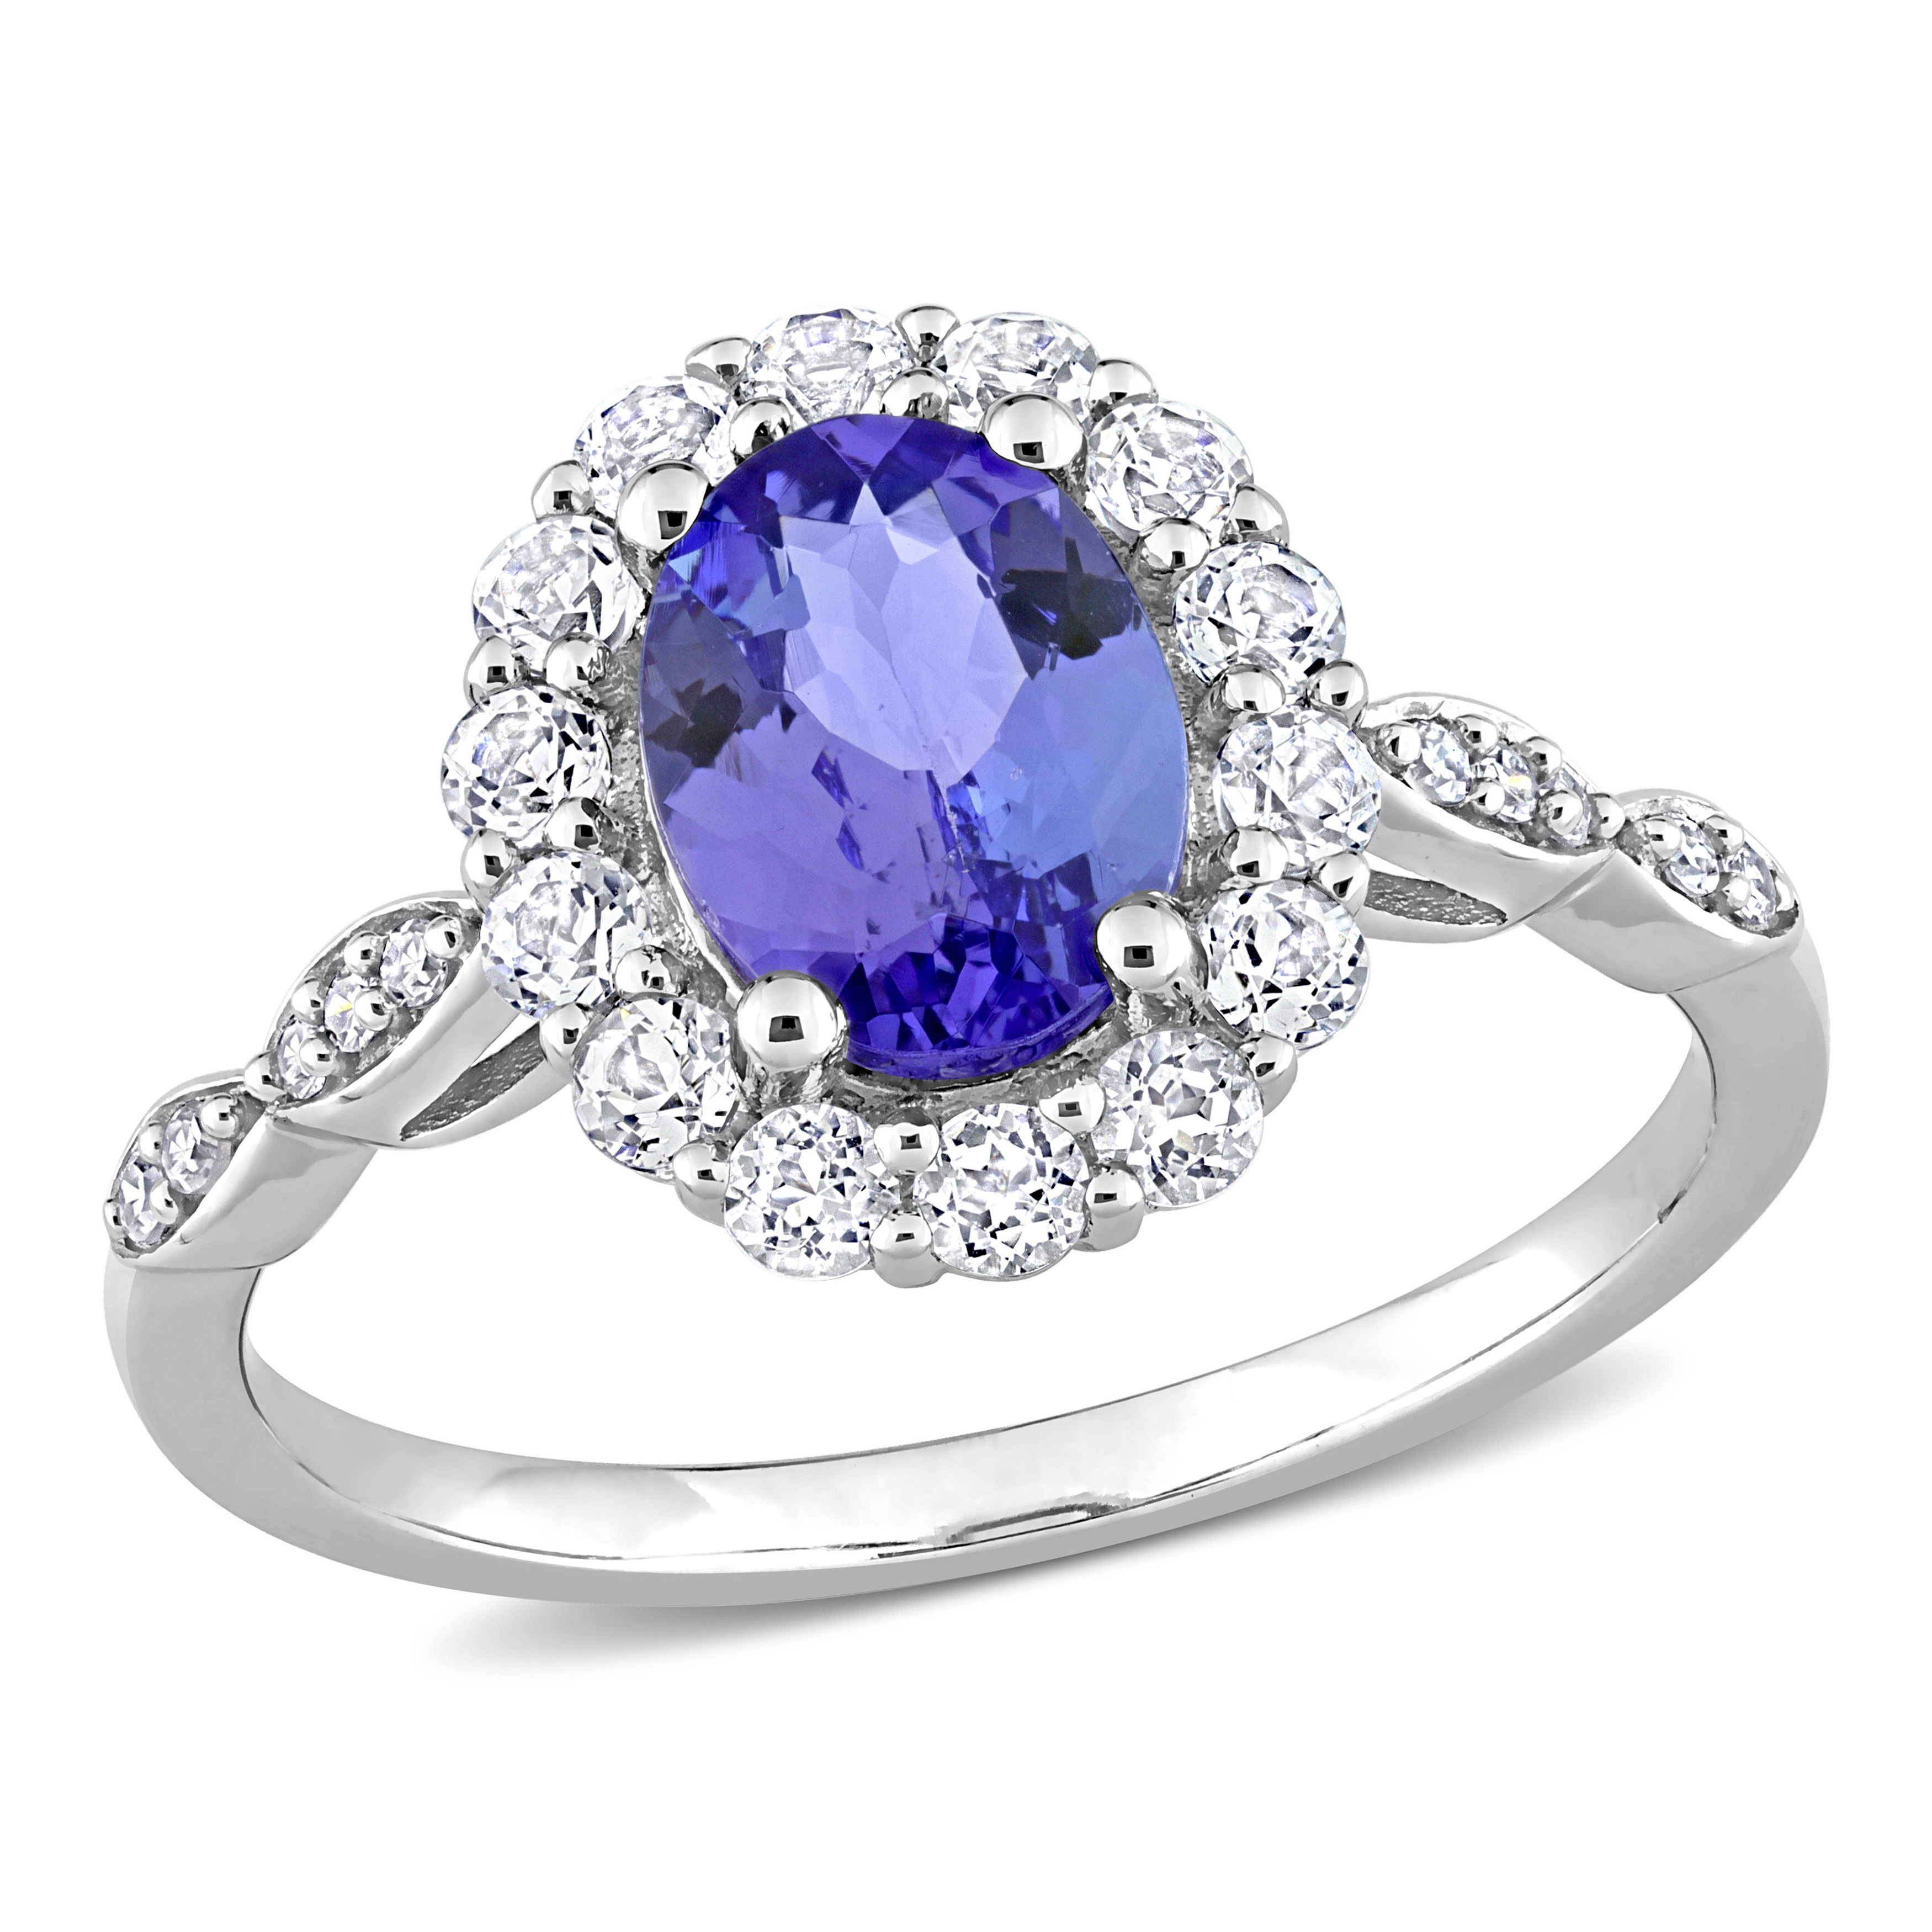 1 7/8 CT TGW Oval Shape Tanzanite, White Topaz and Diamond Accent Vintage Halo Ring in 14k White Gold